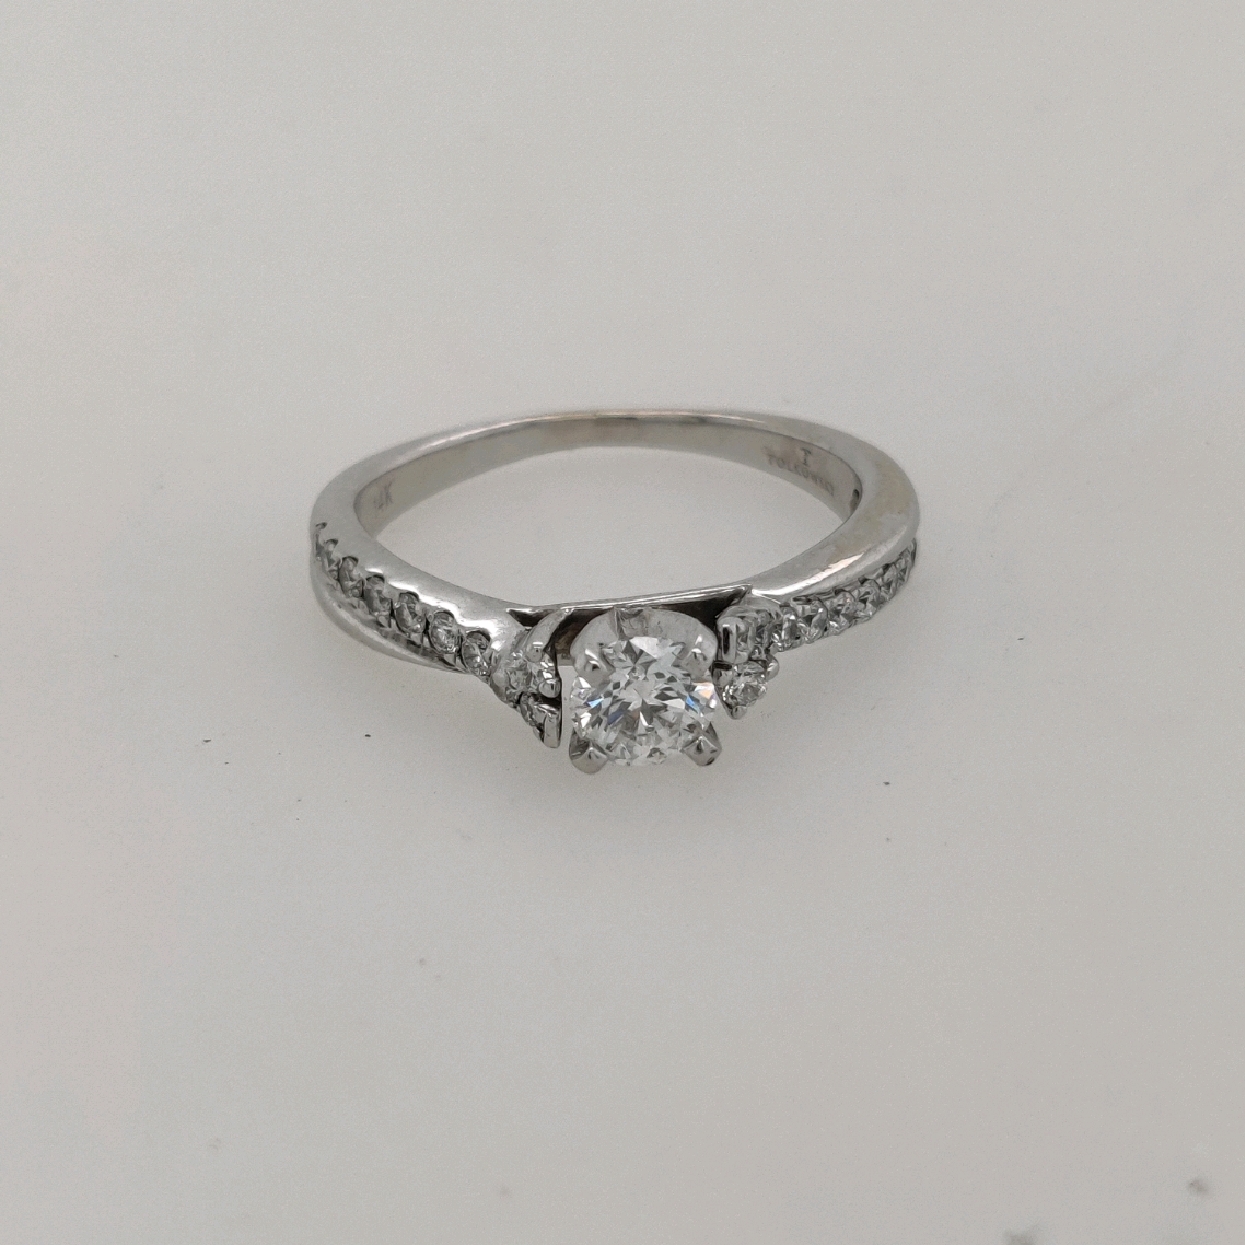 14K White Gold Engagement Ring with 0.33CT Center Stone with Diamonds on the Shank; Size 5.75

Center Stone is F Color; SI1 Clarity